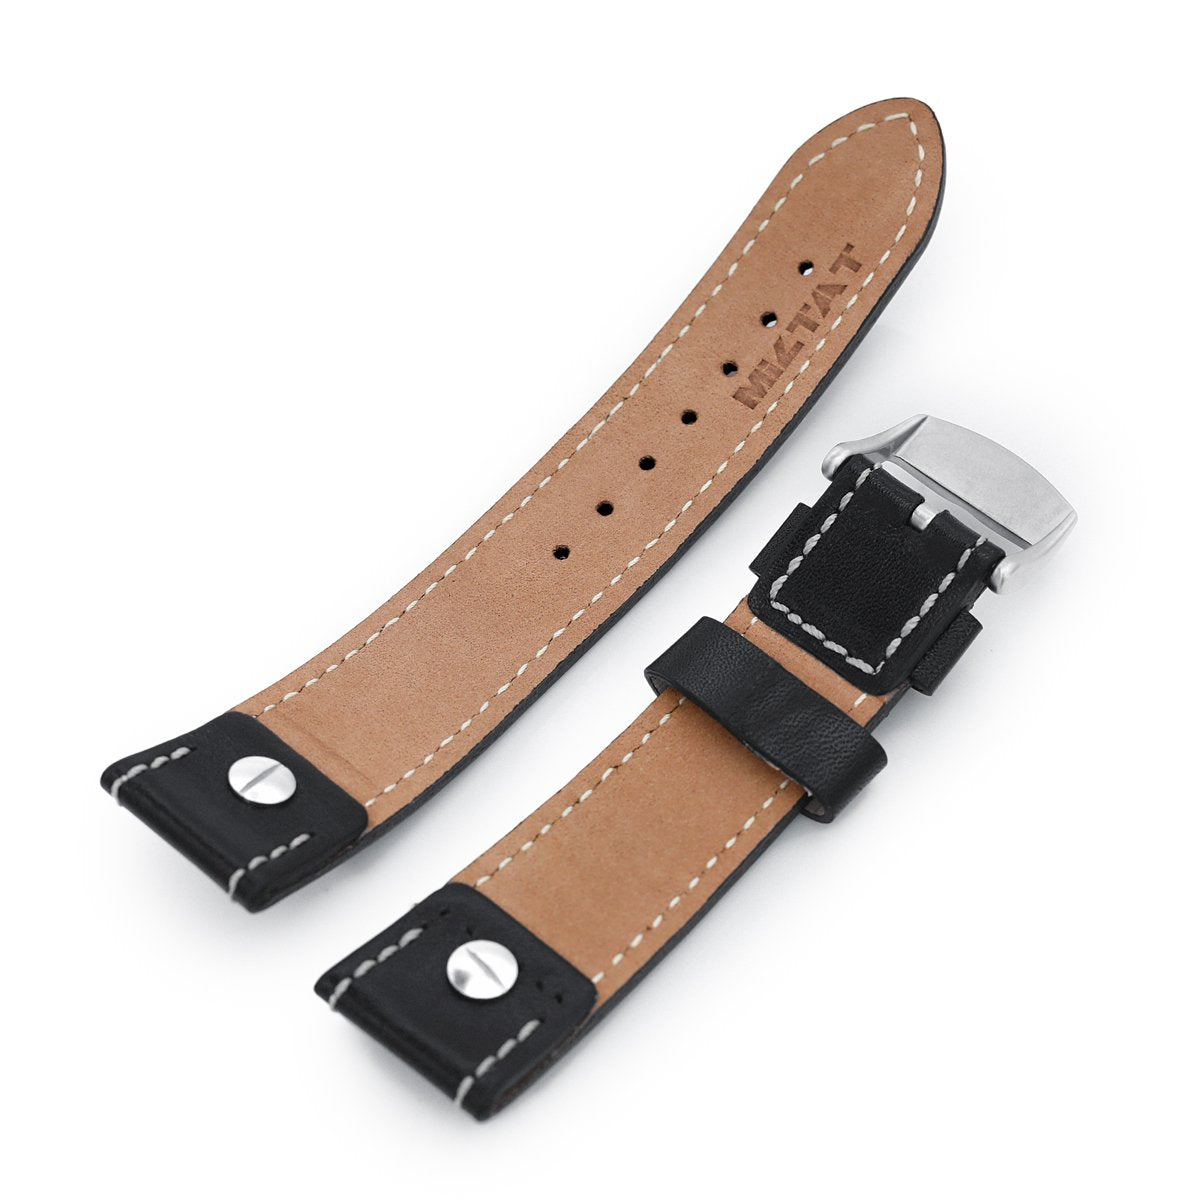 German made 22mm Sturdy Semi-gloss Black Saddle Leather with Rivet Watch Band Brushed Strapcode Watch Bands